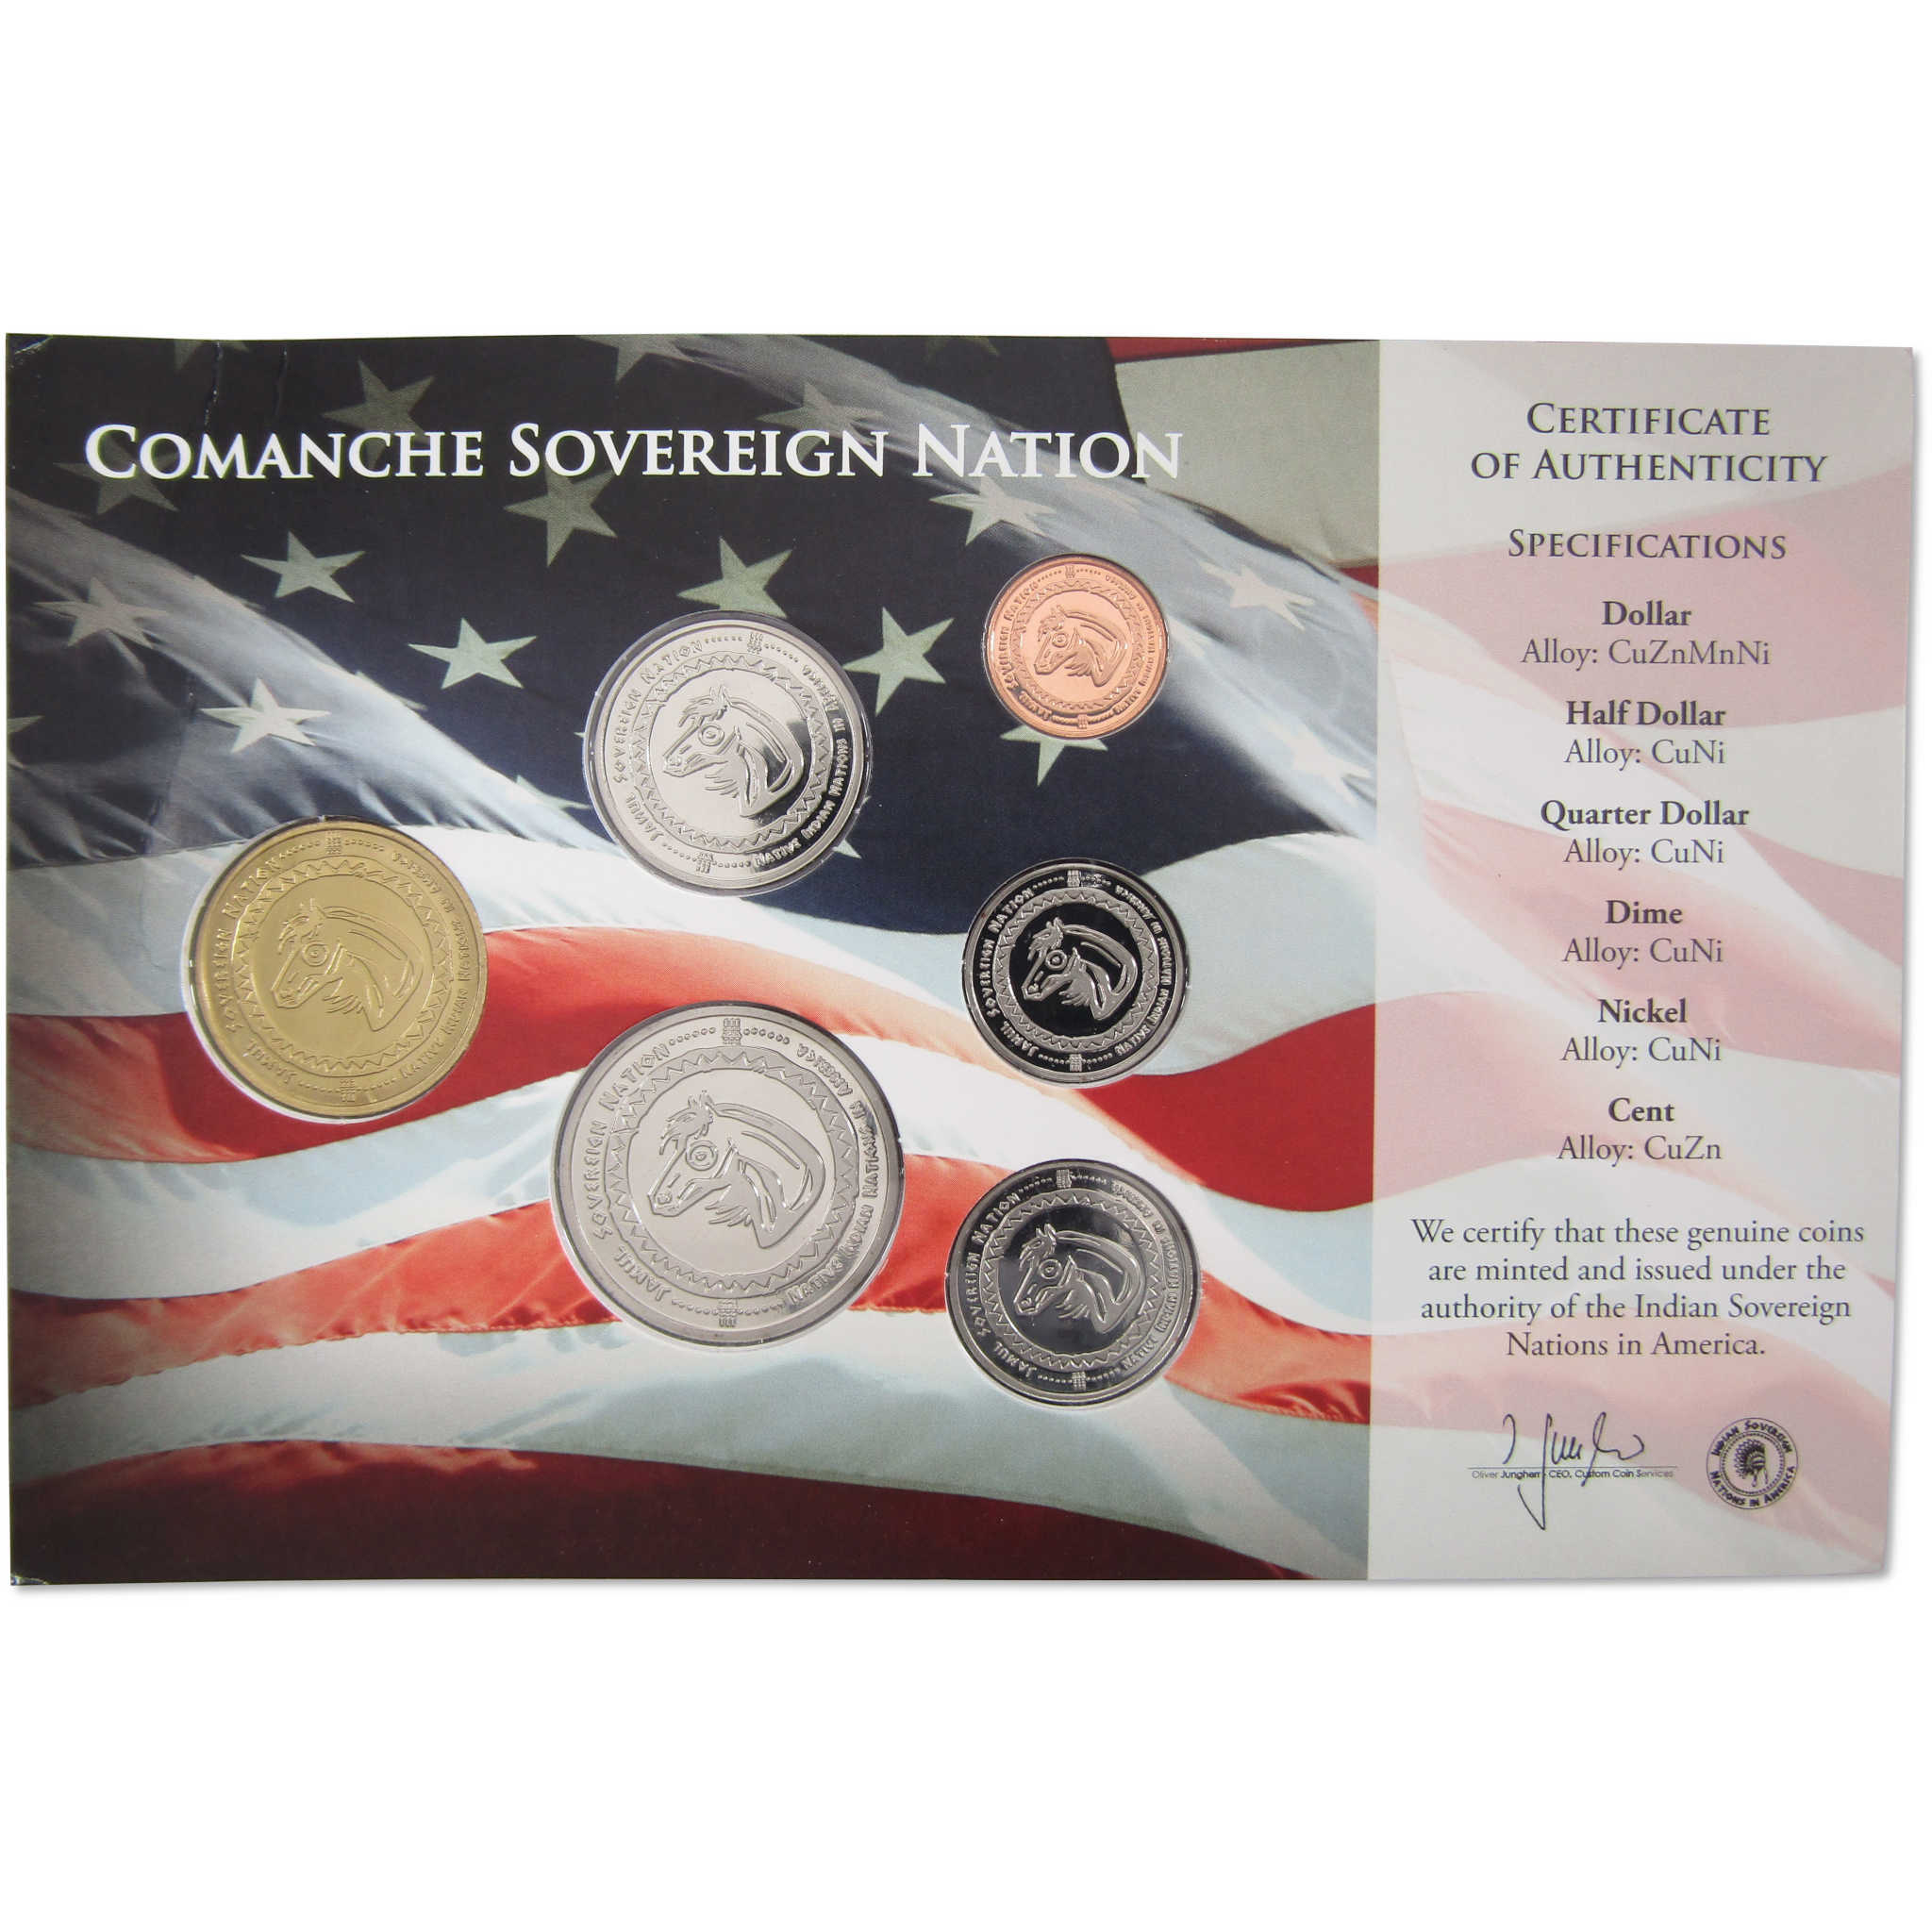 2019 Jamul Native American Comanche Sovereign Nation Uncirculated Coin Set